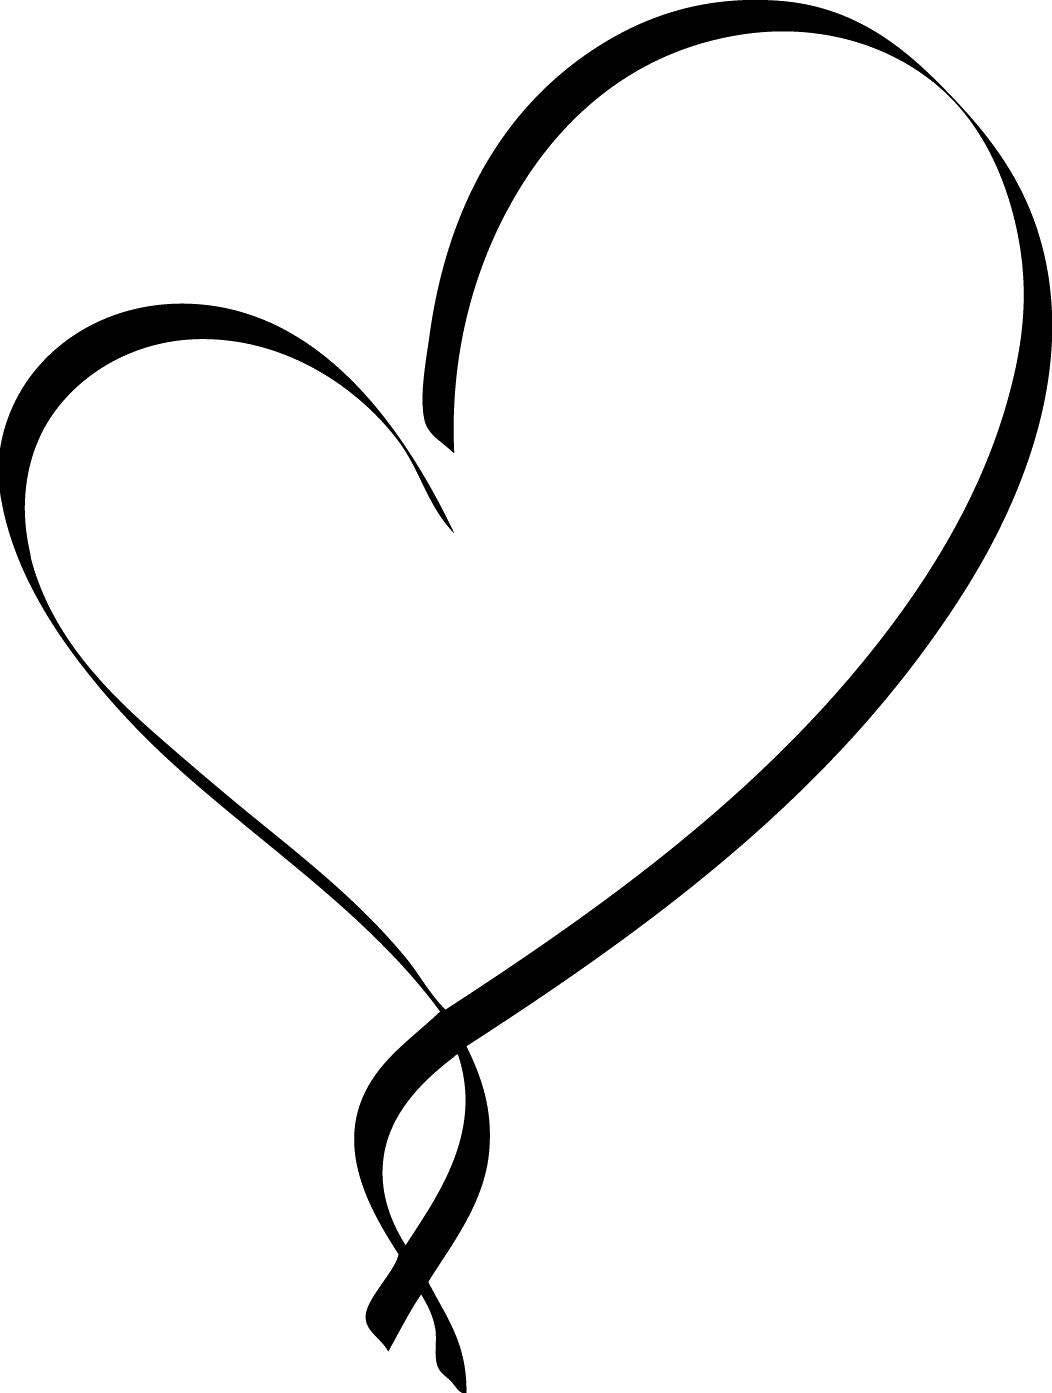 isolated, heart, fancy lines 500 png download